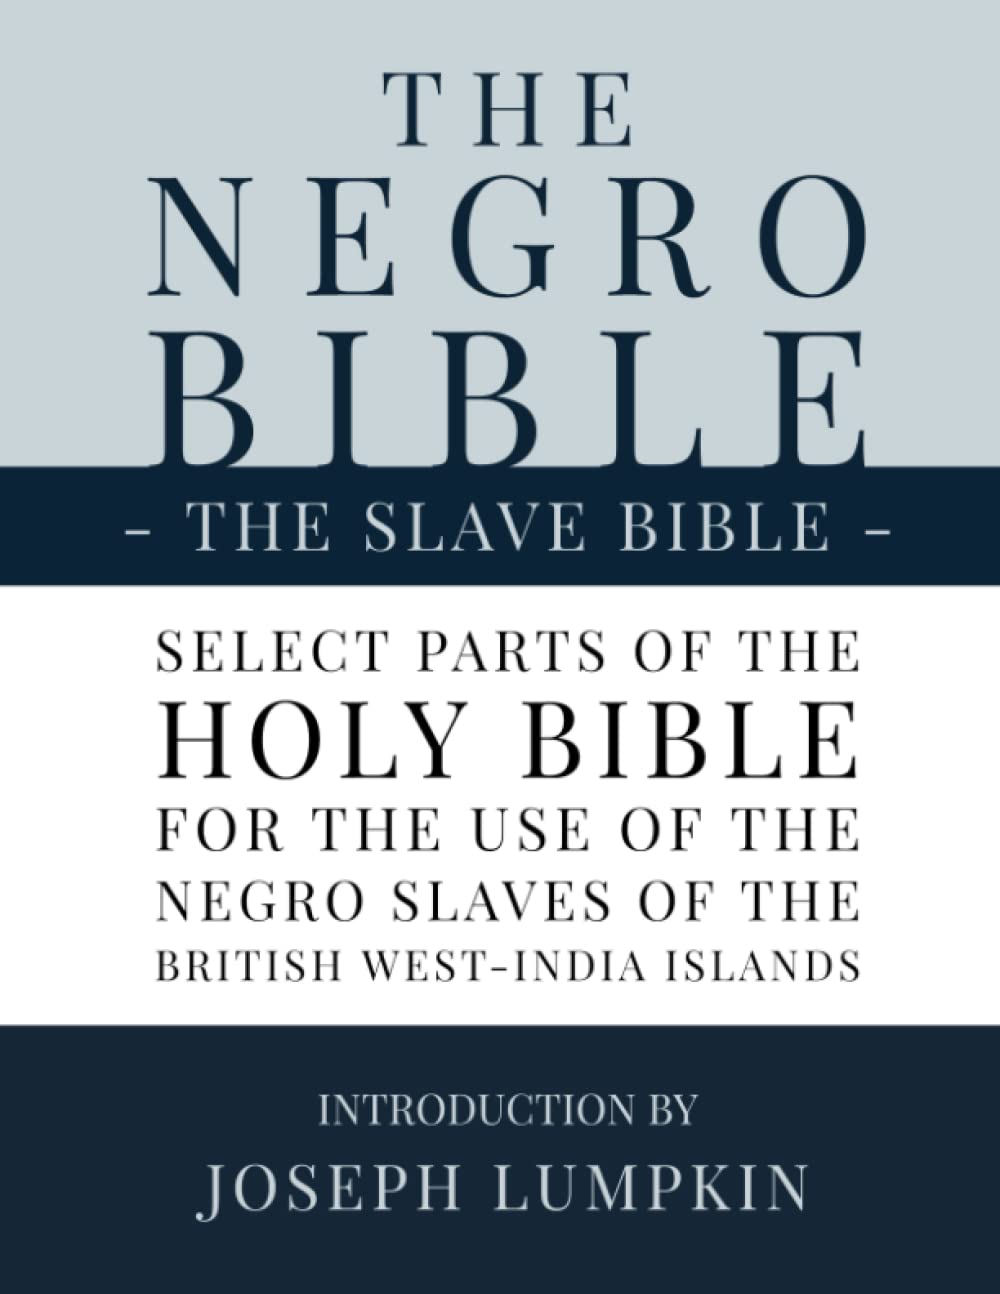 The Slave Bible, The Negro Bible: Select Parts of the Holy Bible, Selected for the use of the Negro Slaves, in the British West-India Islands, with Introduction by Joseph Lumpkin